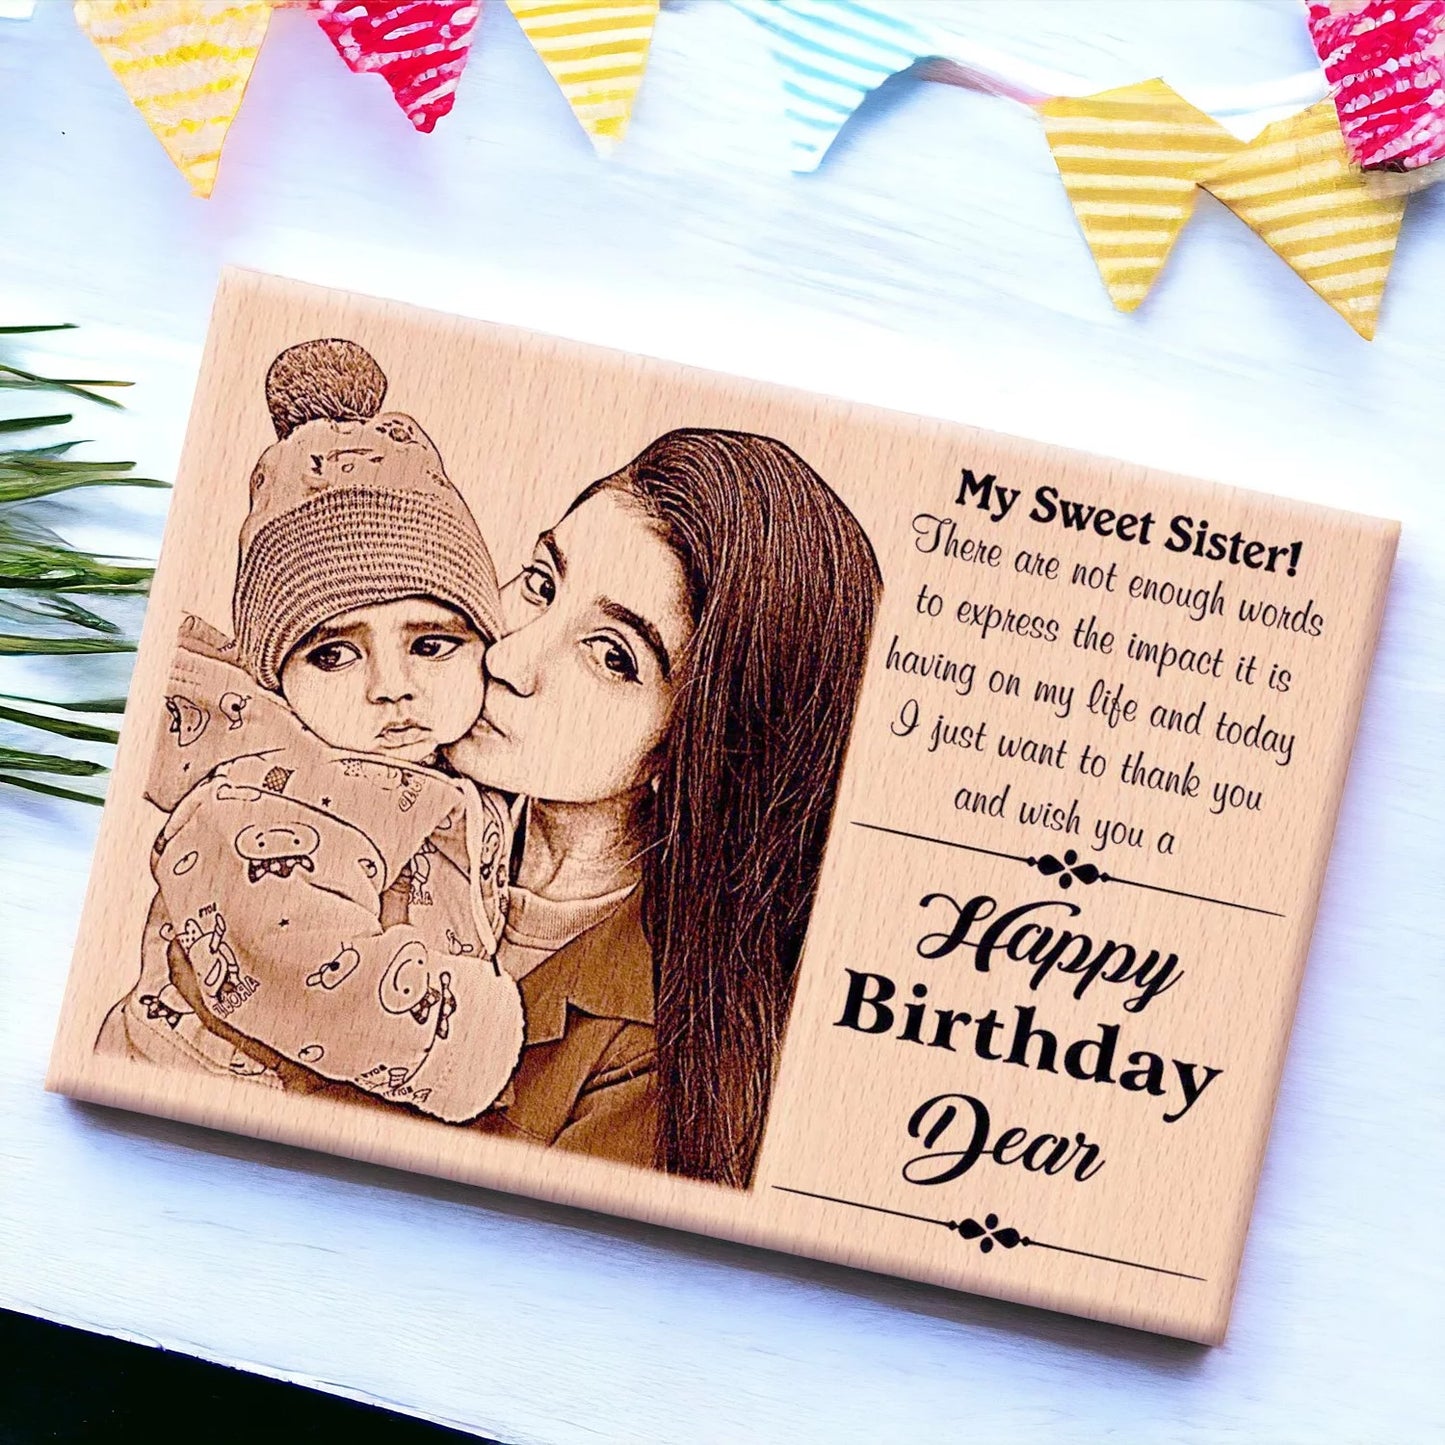 Customized Wooden Engraved Photo Frame Birthday Ideas For Sister